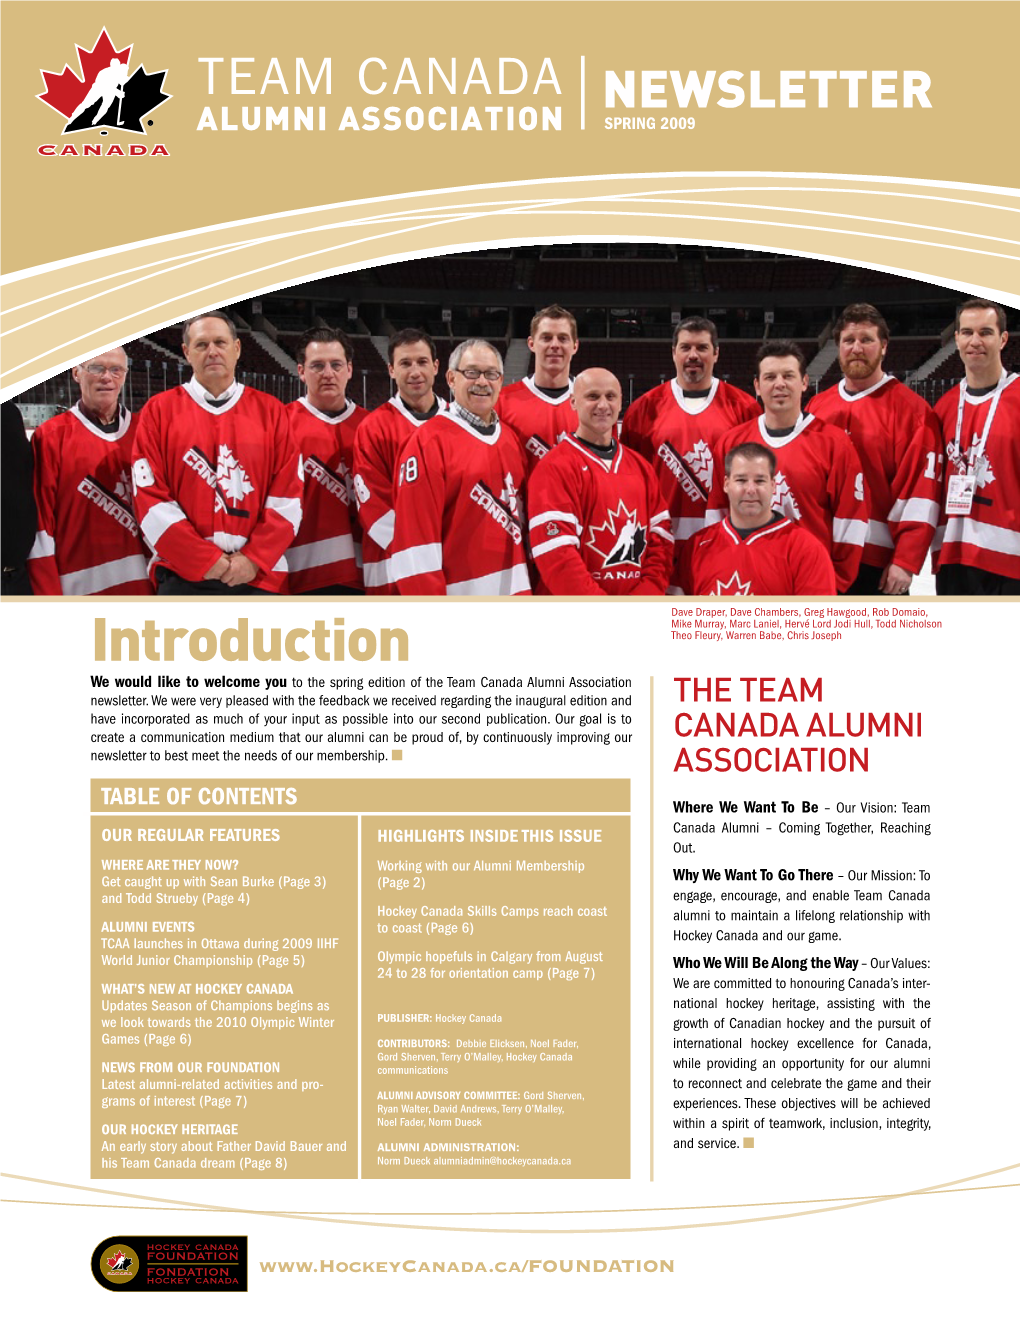 Introduction Theo Fleury, Warren Babe, Chris Joseph We Would Like to Welcome You to the Spring Edition of the Team Canada Alumni Association Newsletter